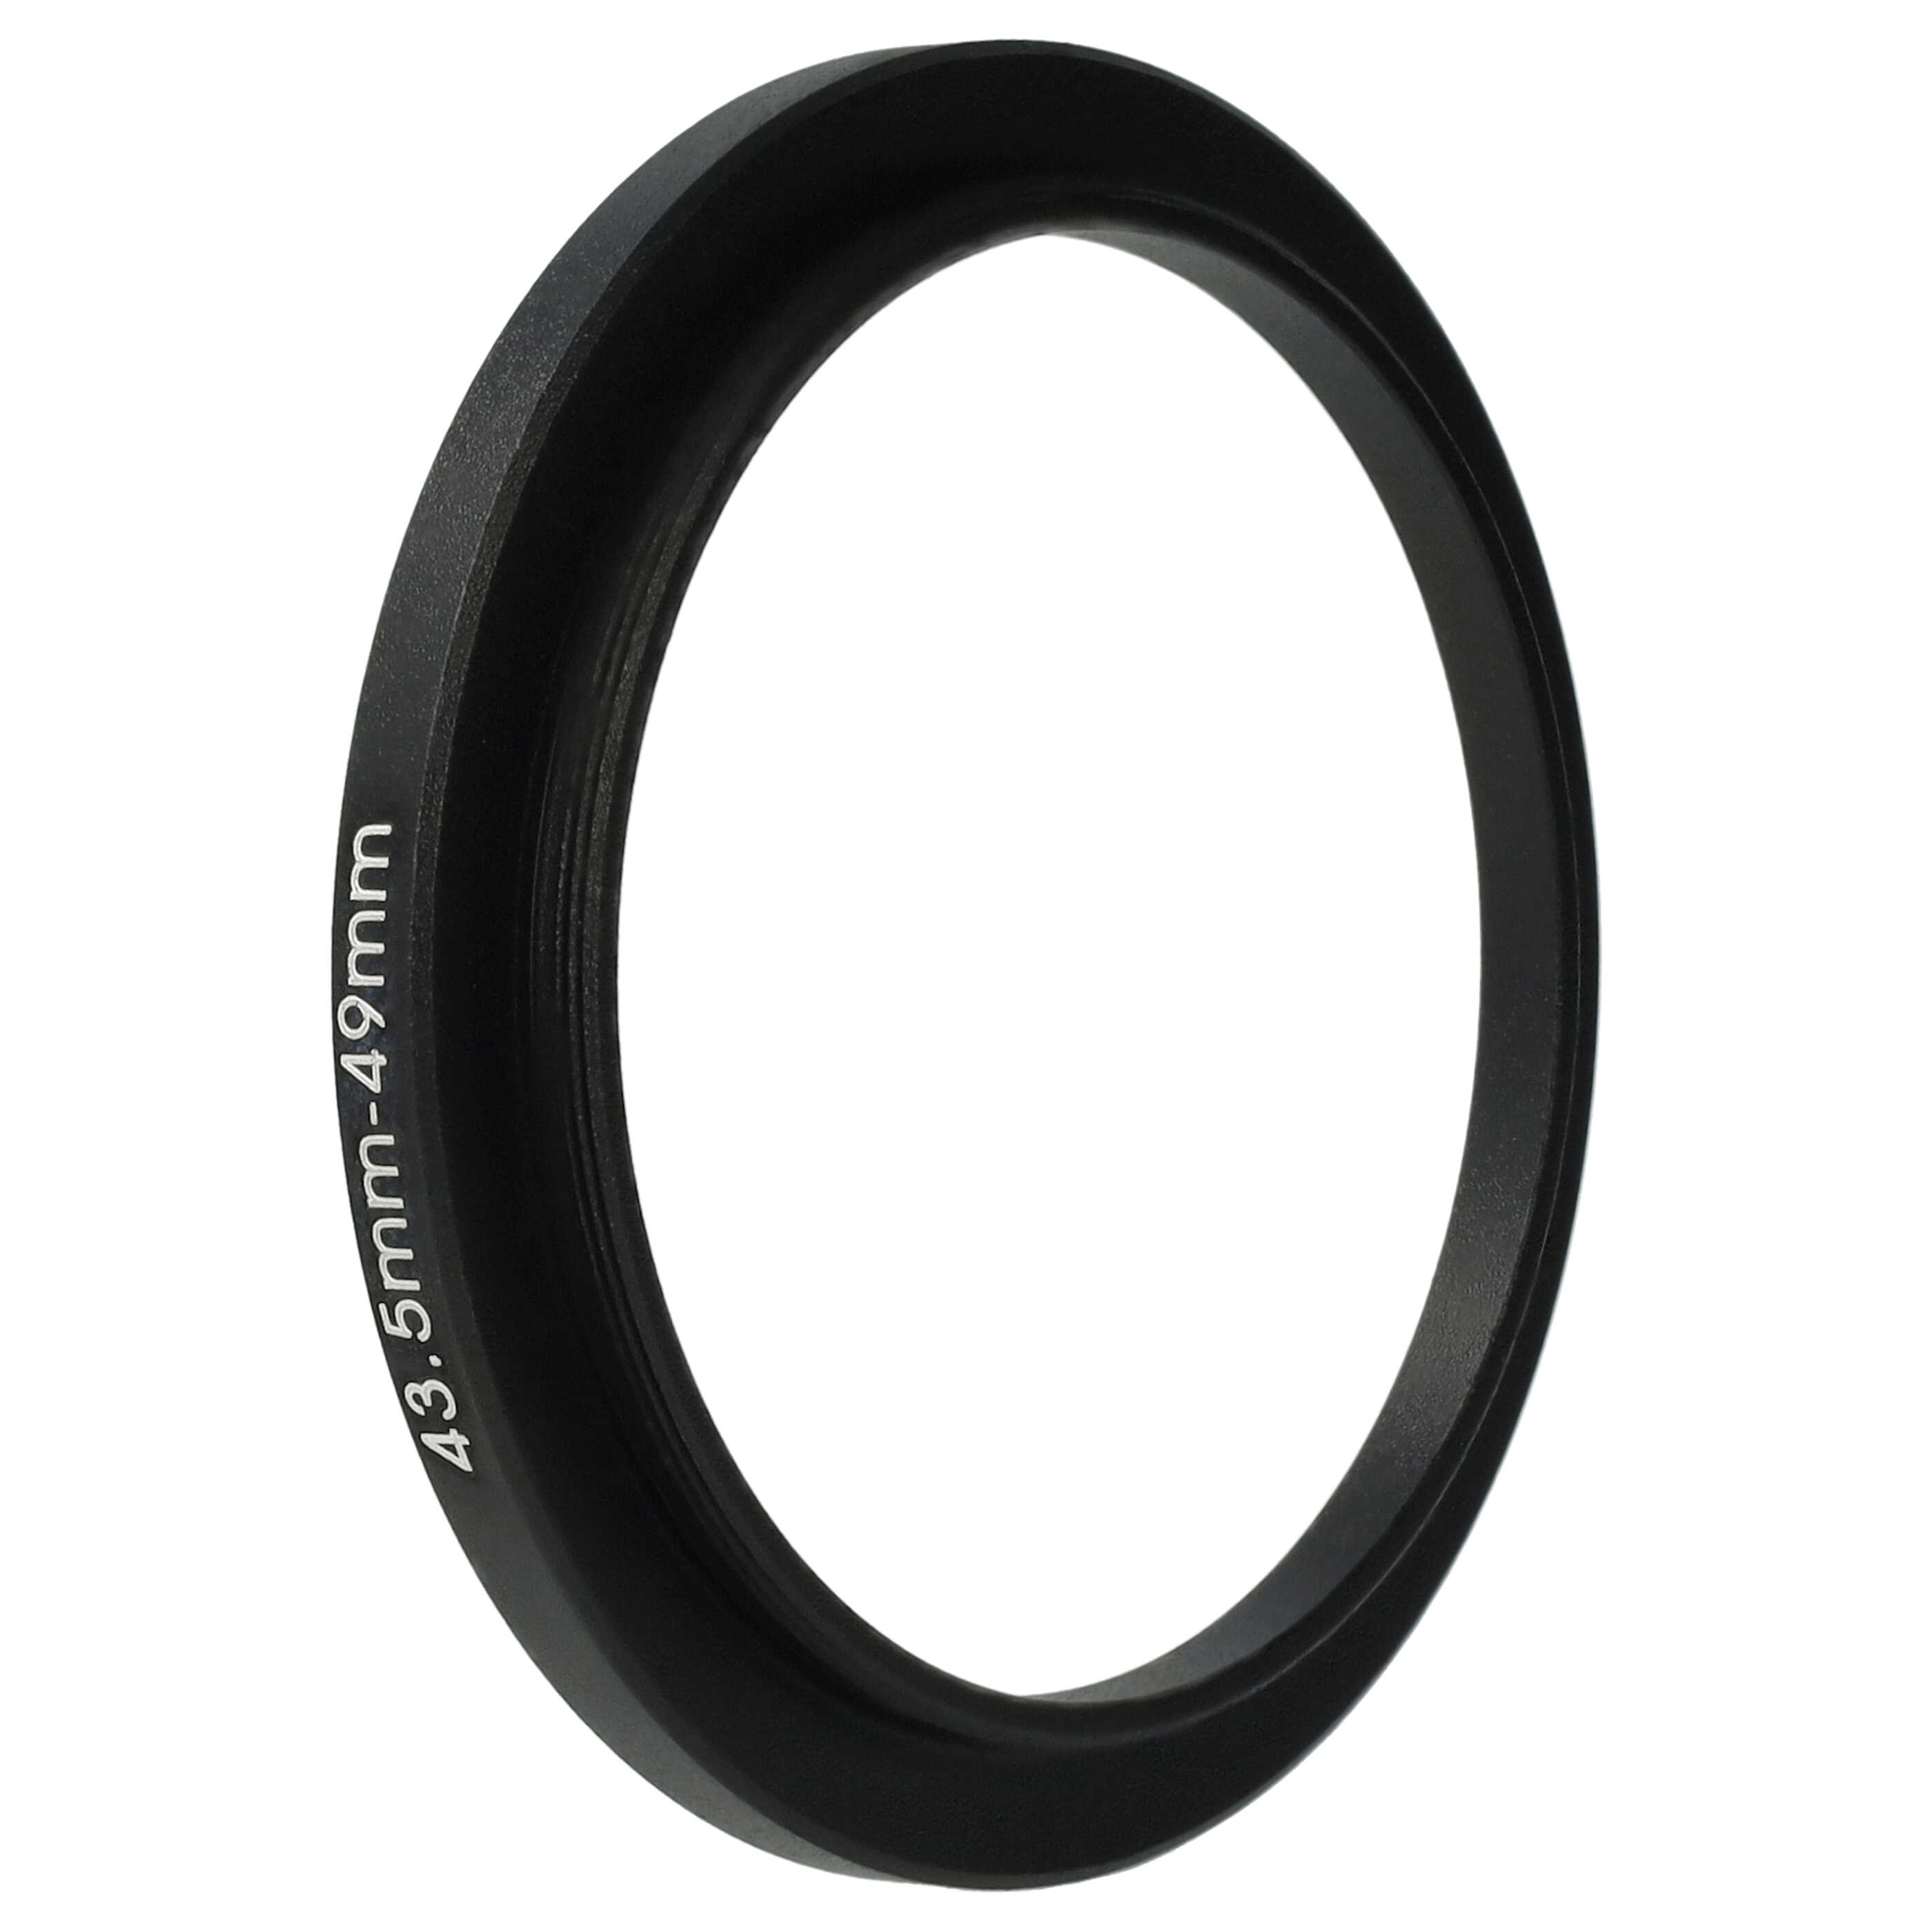 Step-Up Ring Adapter of 43.5 mm to 49 mmfor various Camera Lens - Filter Adapter